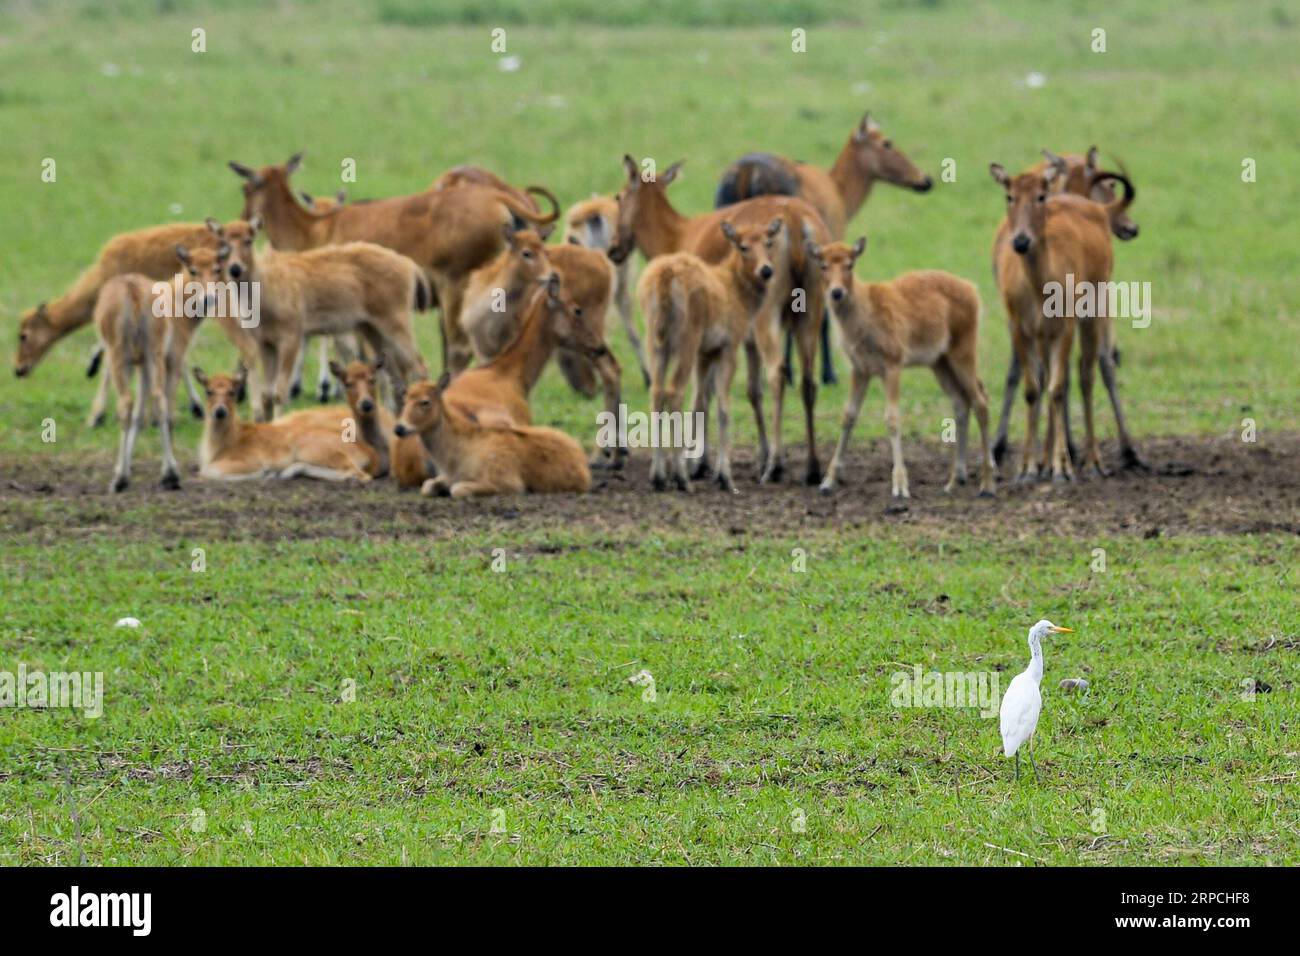 (190705) -- NANJING, July 5, 2019 -- A flock of elks and an egret are seen at the Dafeng Milu National Nature Reserve in the city of Yancheng, east China s Jiangsu Province, June 27, 2019. China s Migratory Bird Sanctuaries along the coast of the Yellow Sea-Bohai Gulf (Phase I) were inscribed on the World Heritage List as a natural site on Friday at the ongoing 43rd session of the UNESCO World Heritage Committee in Azerbaijan s capital of Baku. Migratory Bird Sanctuaries along the coast of the Yellow Sea-Bohai Gulf of China are located in the Yellow Sea ecoregion, containing the world s larges Stock Photo